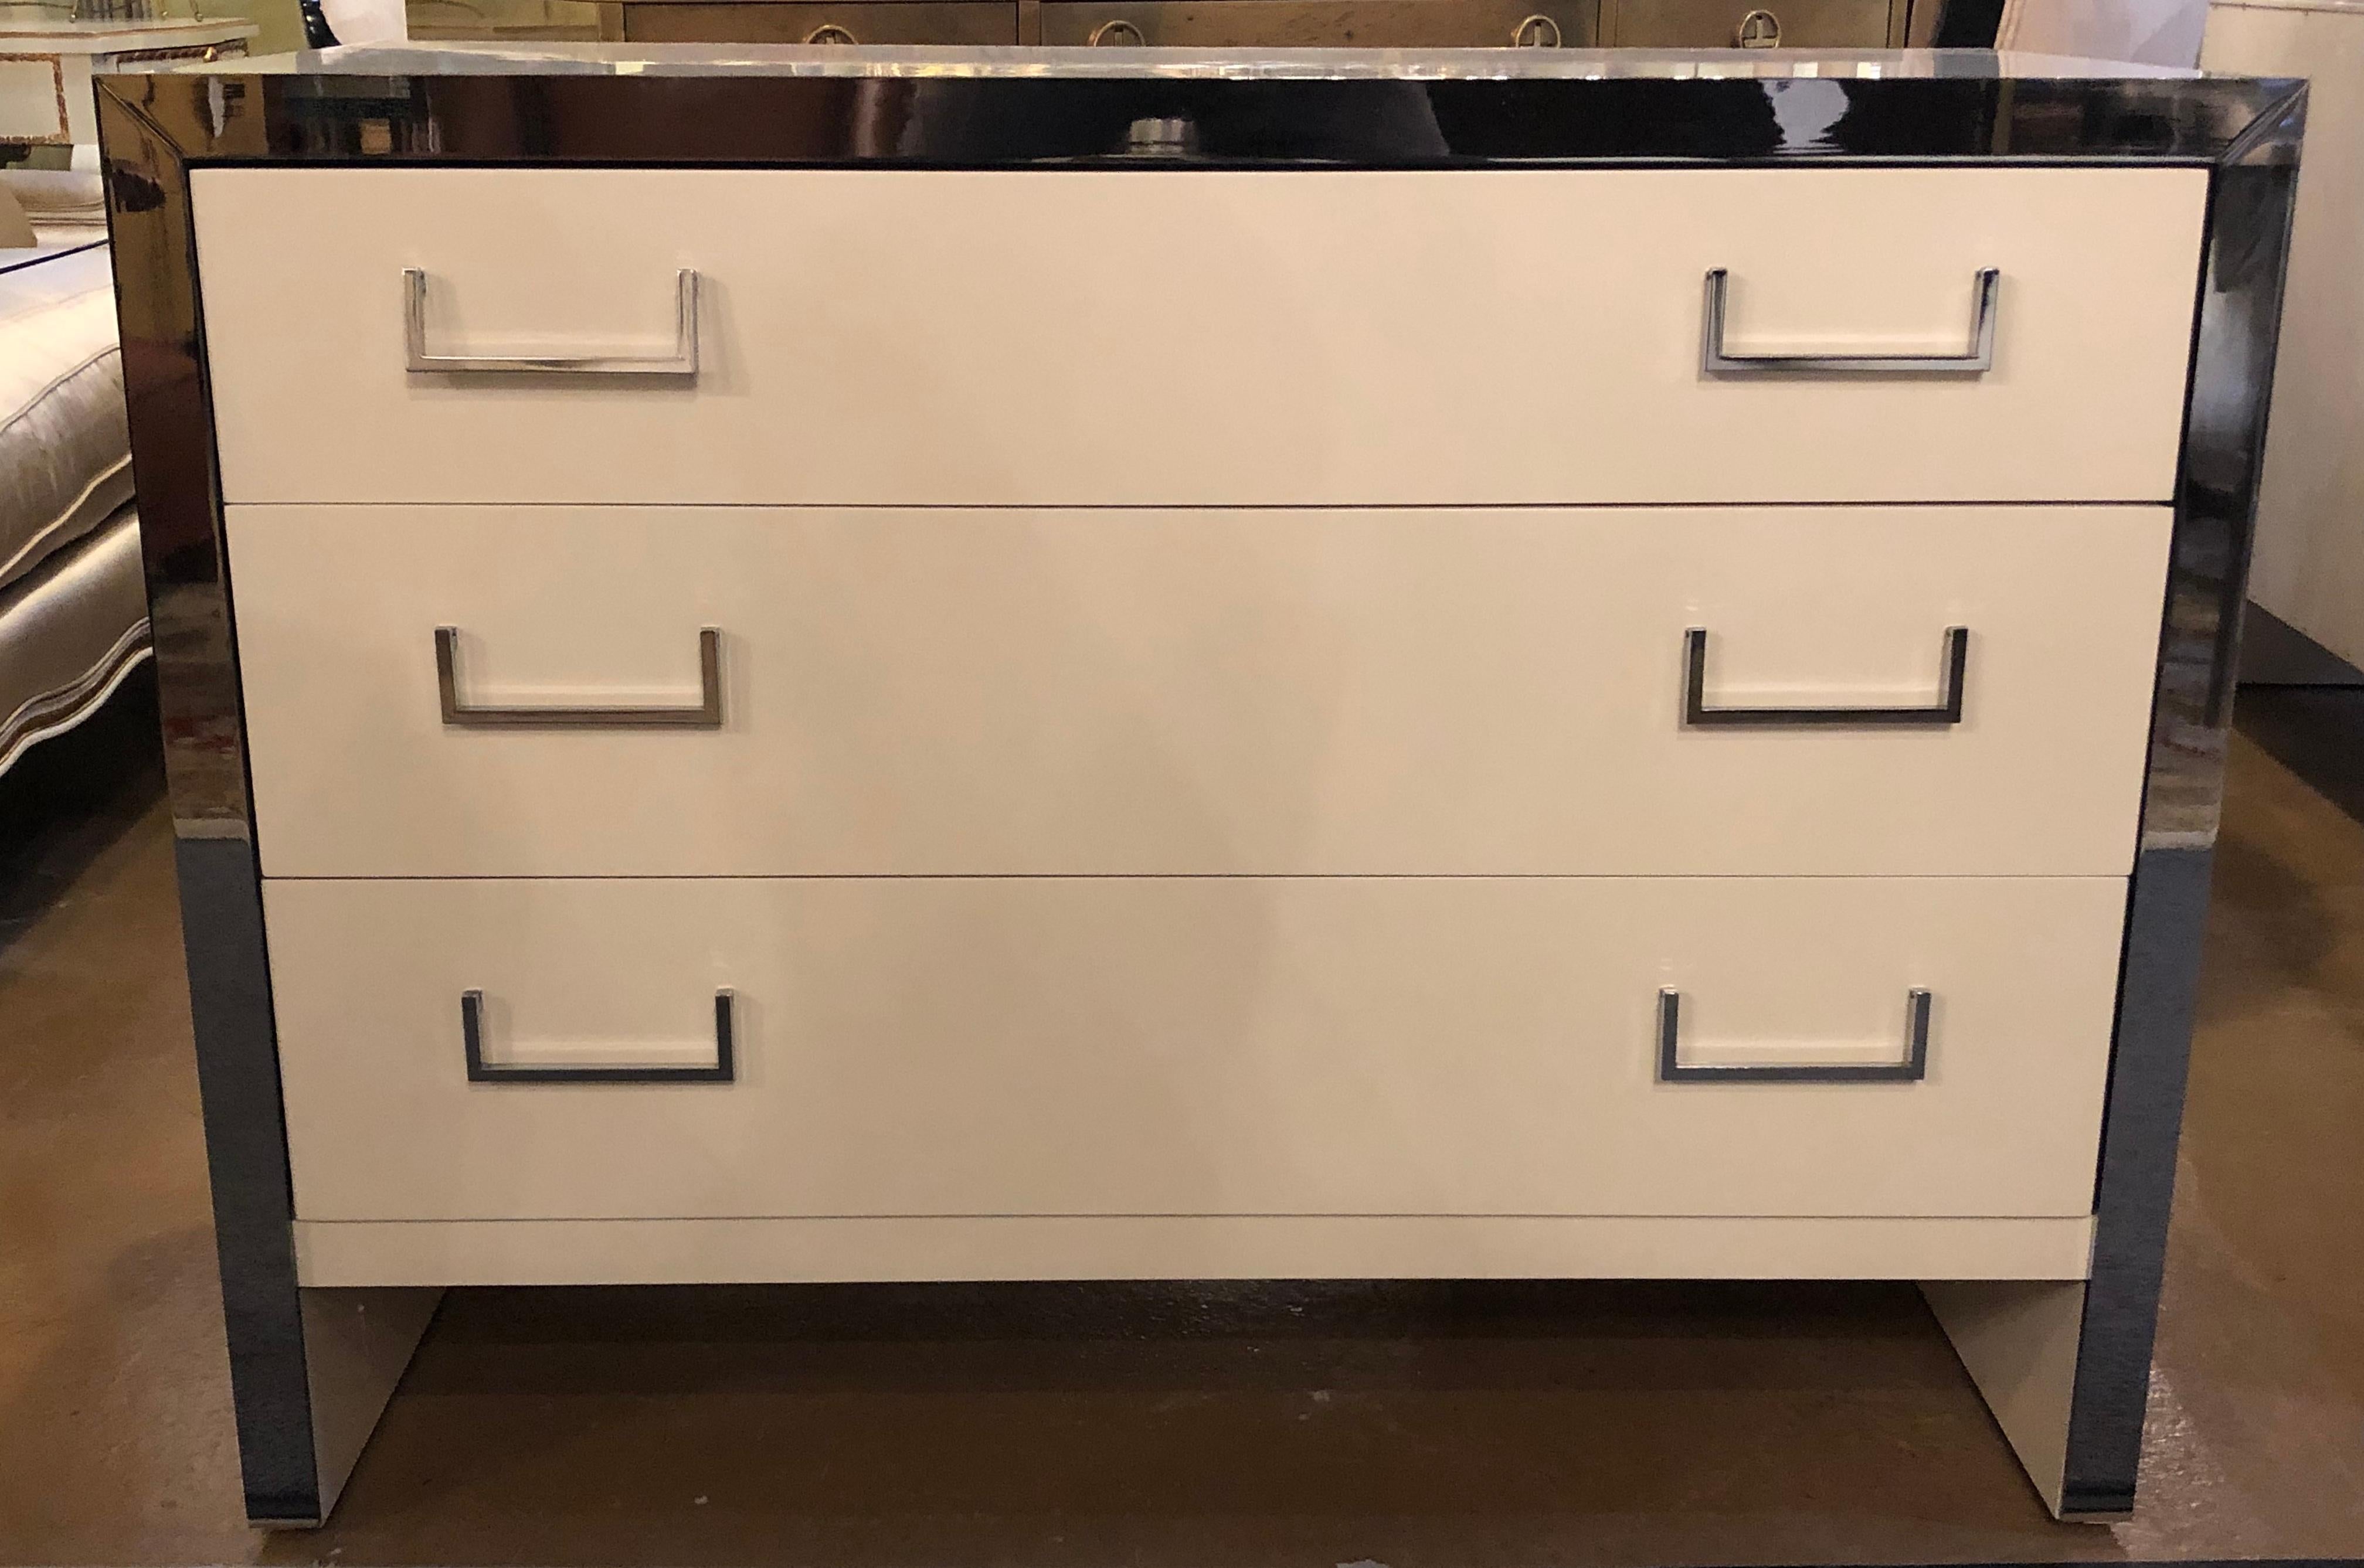 Pair of spectacular Mid-Century Modern recently refinished John Stuart labeled white lacquer and chrome accented chests, commodes, dressers or nightstands. These stunning Milo Baughman Designed pair of chests by the Highly Sort After Designer, John